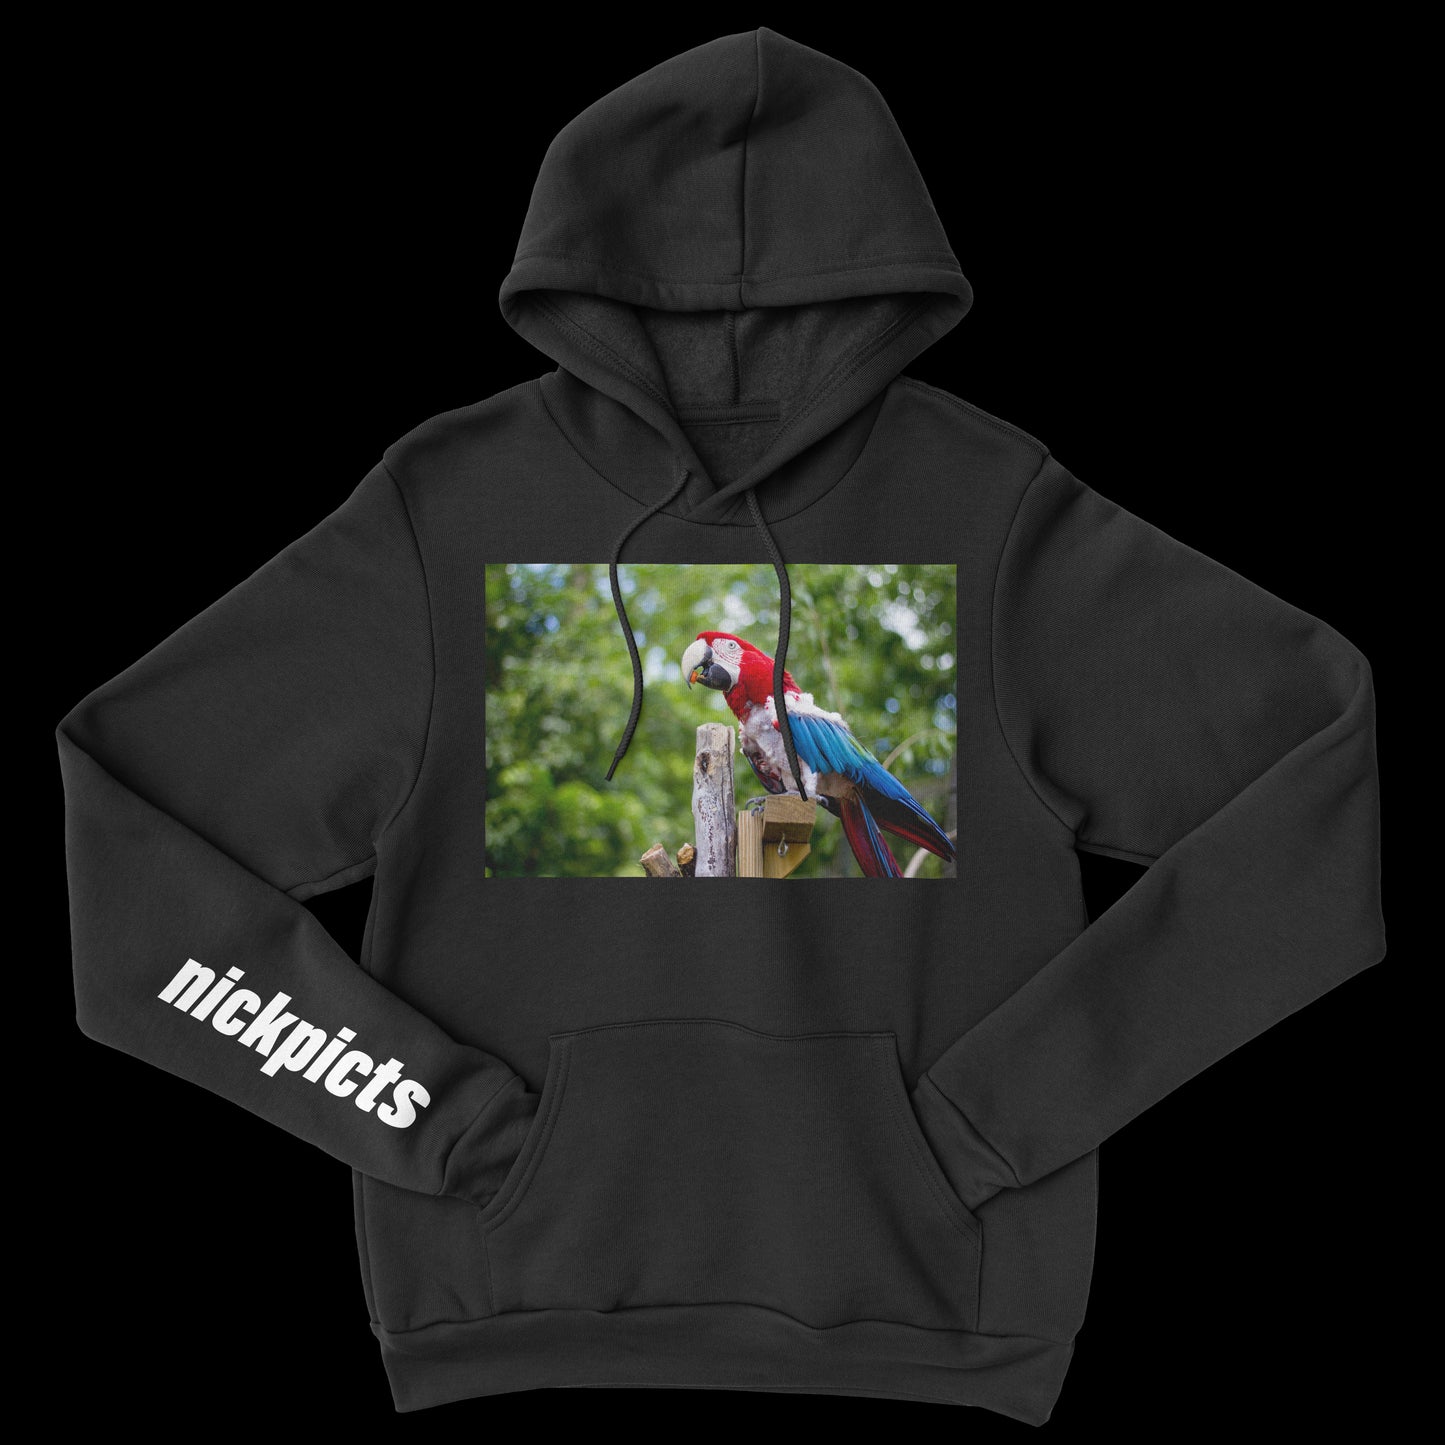 Nick Picts "Parrot" Local Photography Hoodie